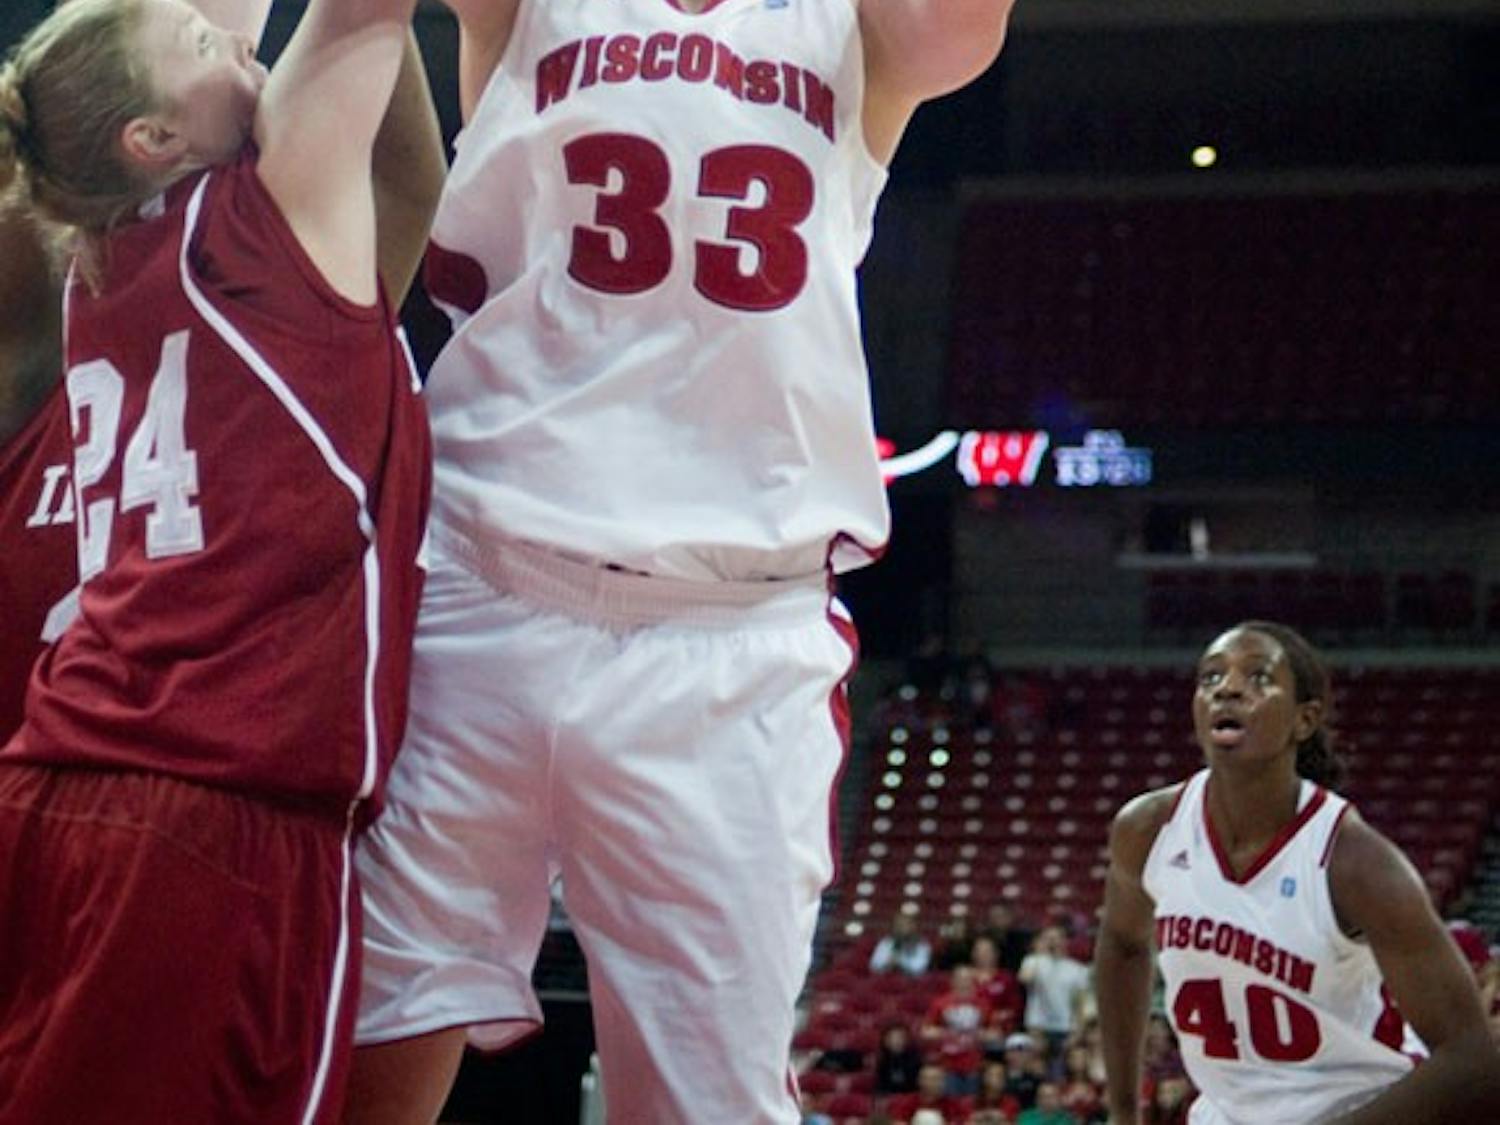 Wisconsin edges out Indiana in Kohl Center season finale